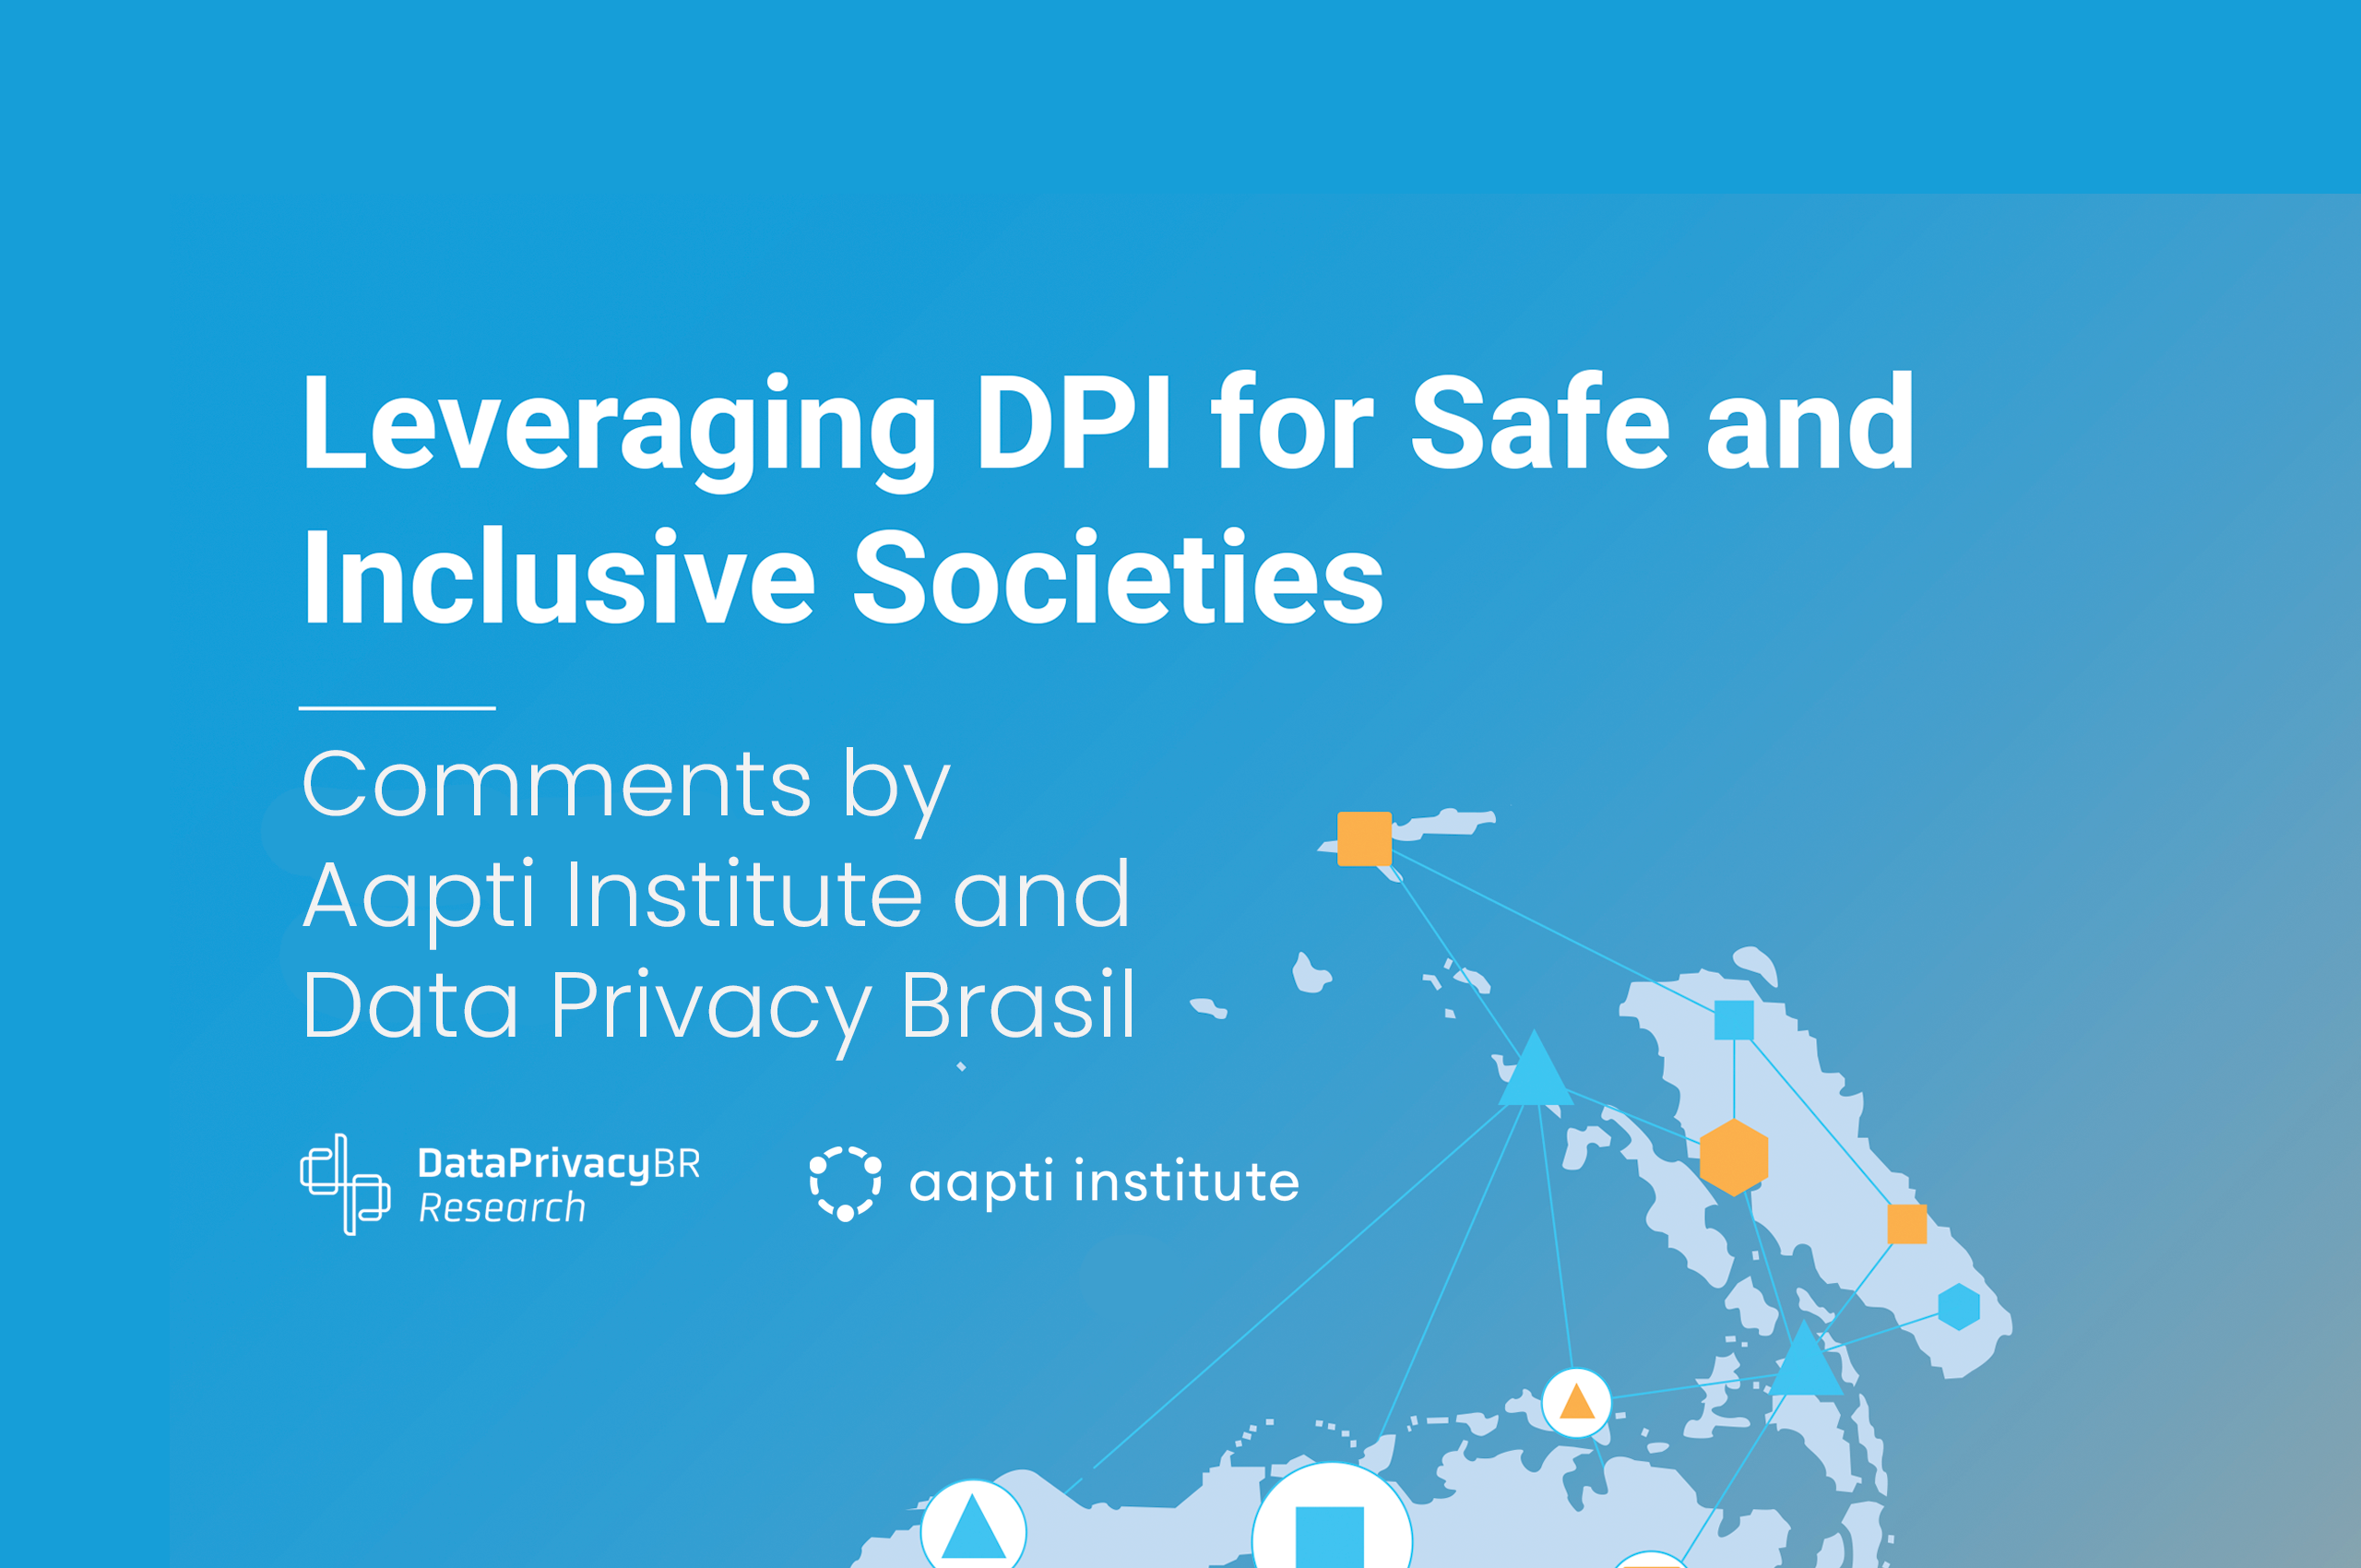 http://Leveraging%20DPI%20for%20Safe%20and%20Inclusive%20Societies